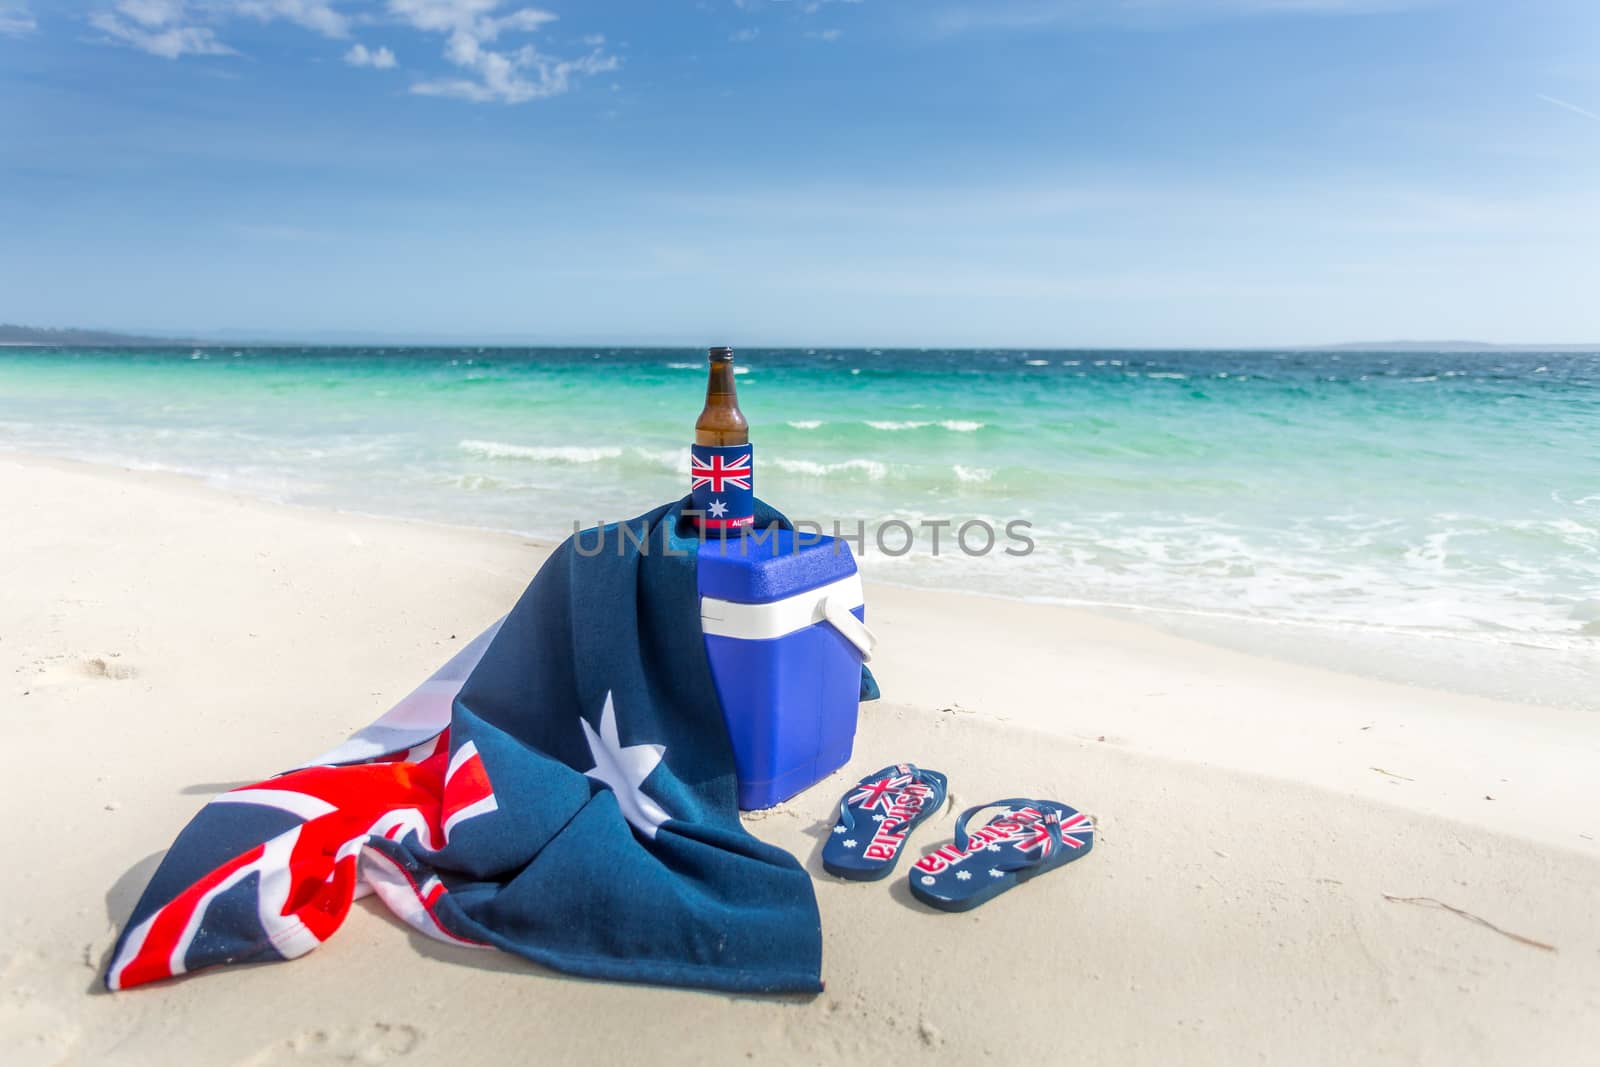 Iconic Australian items on a beach, esky, beach towel, beer or beverage and thongs.  Some items have the Australian flag on them